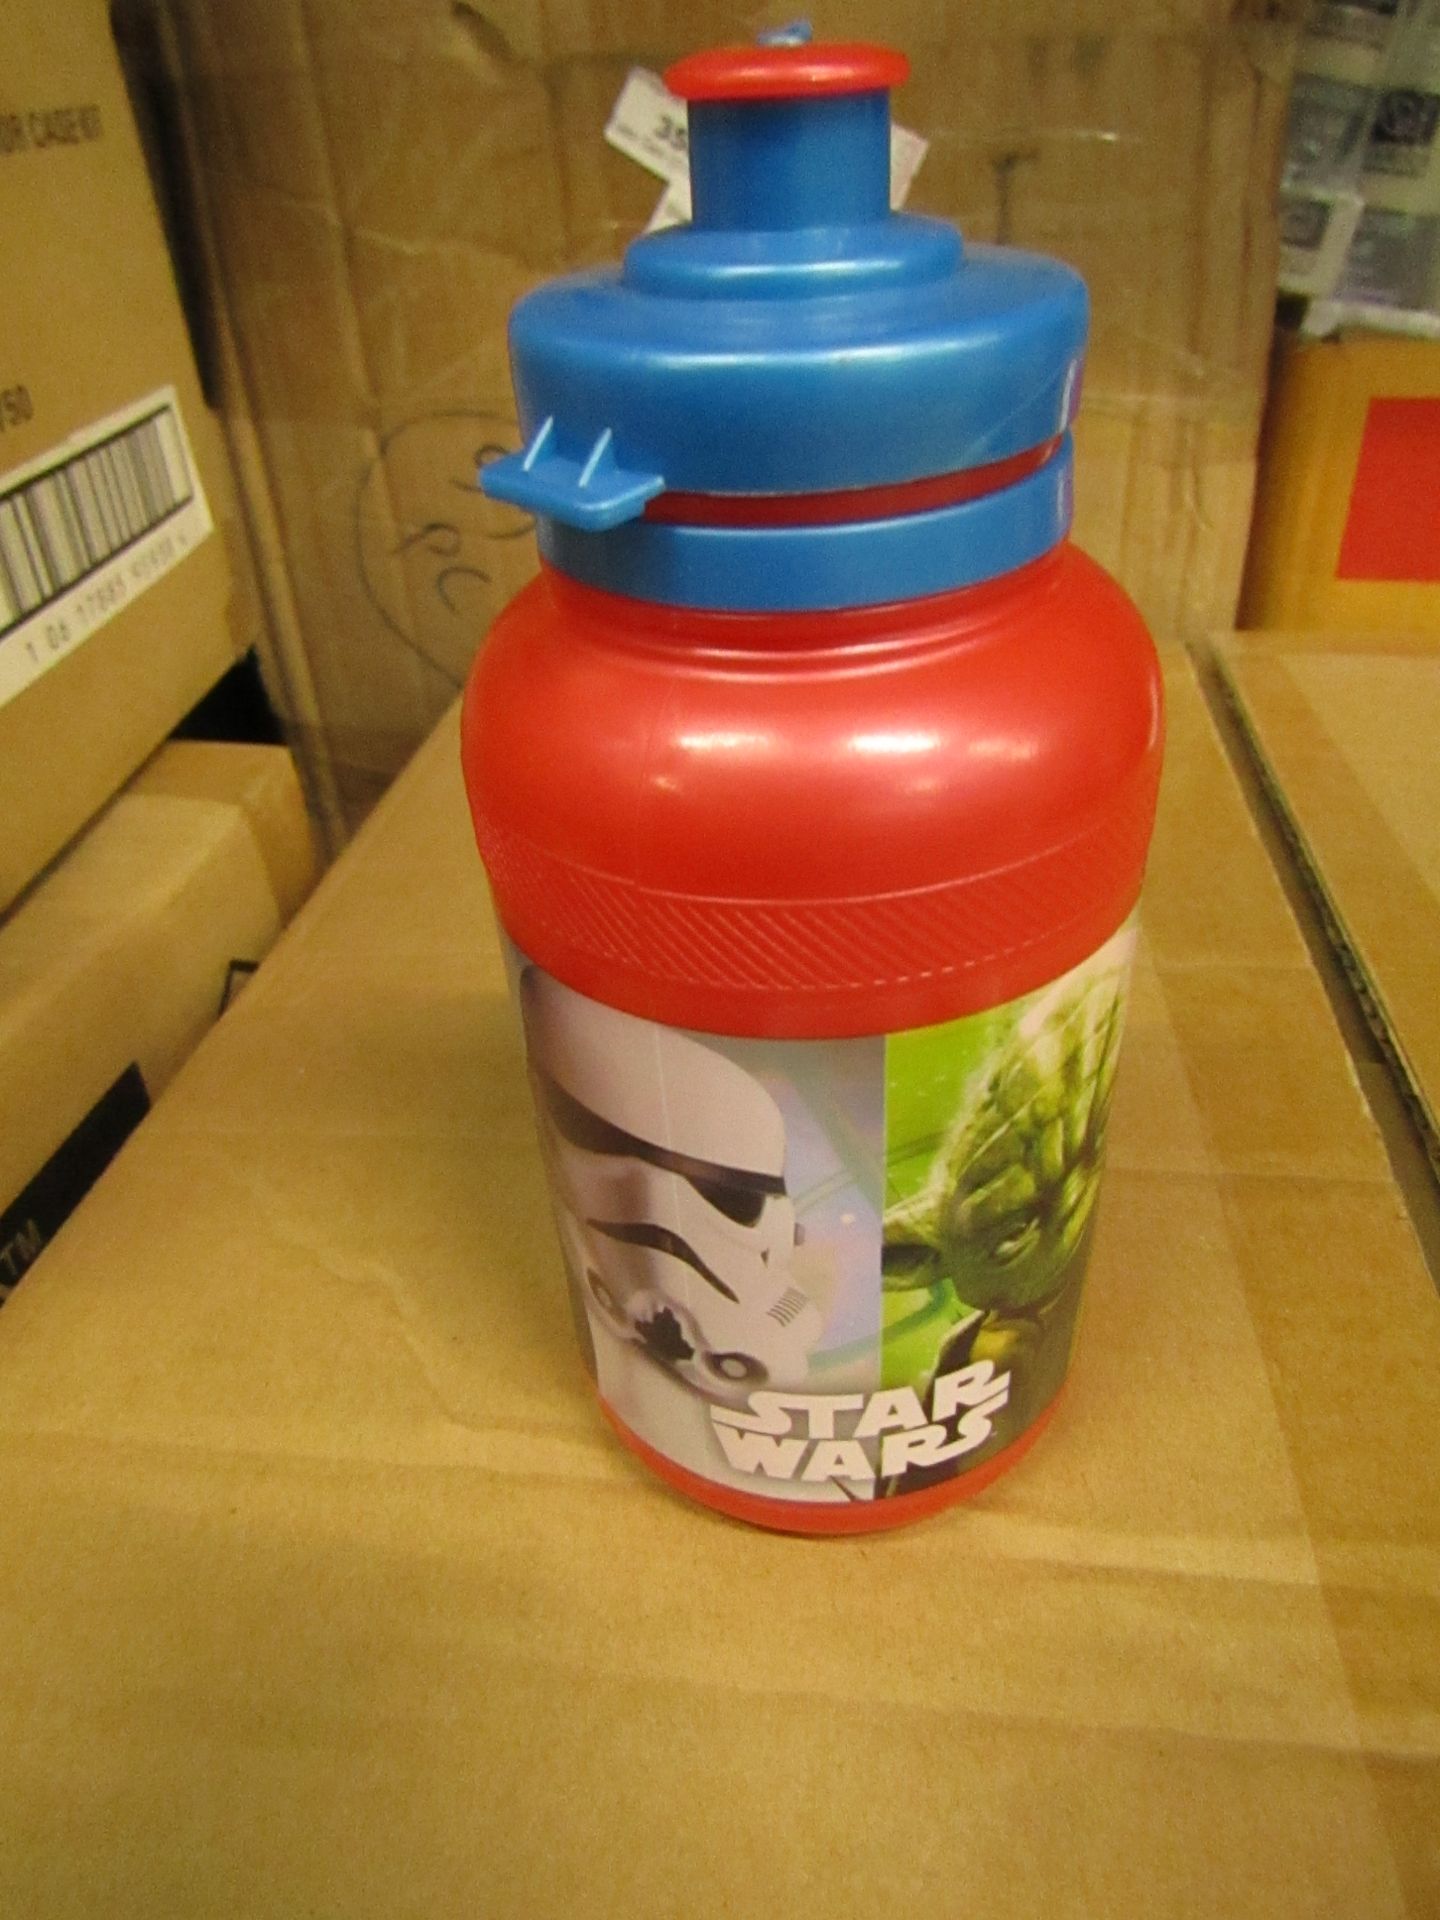 12X StarWars - Refillable water bottles - all boxed.